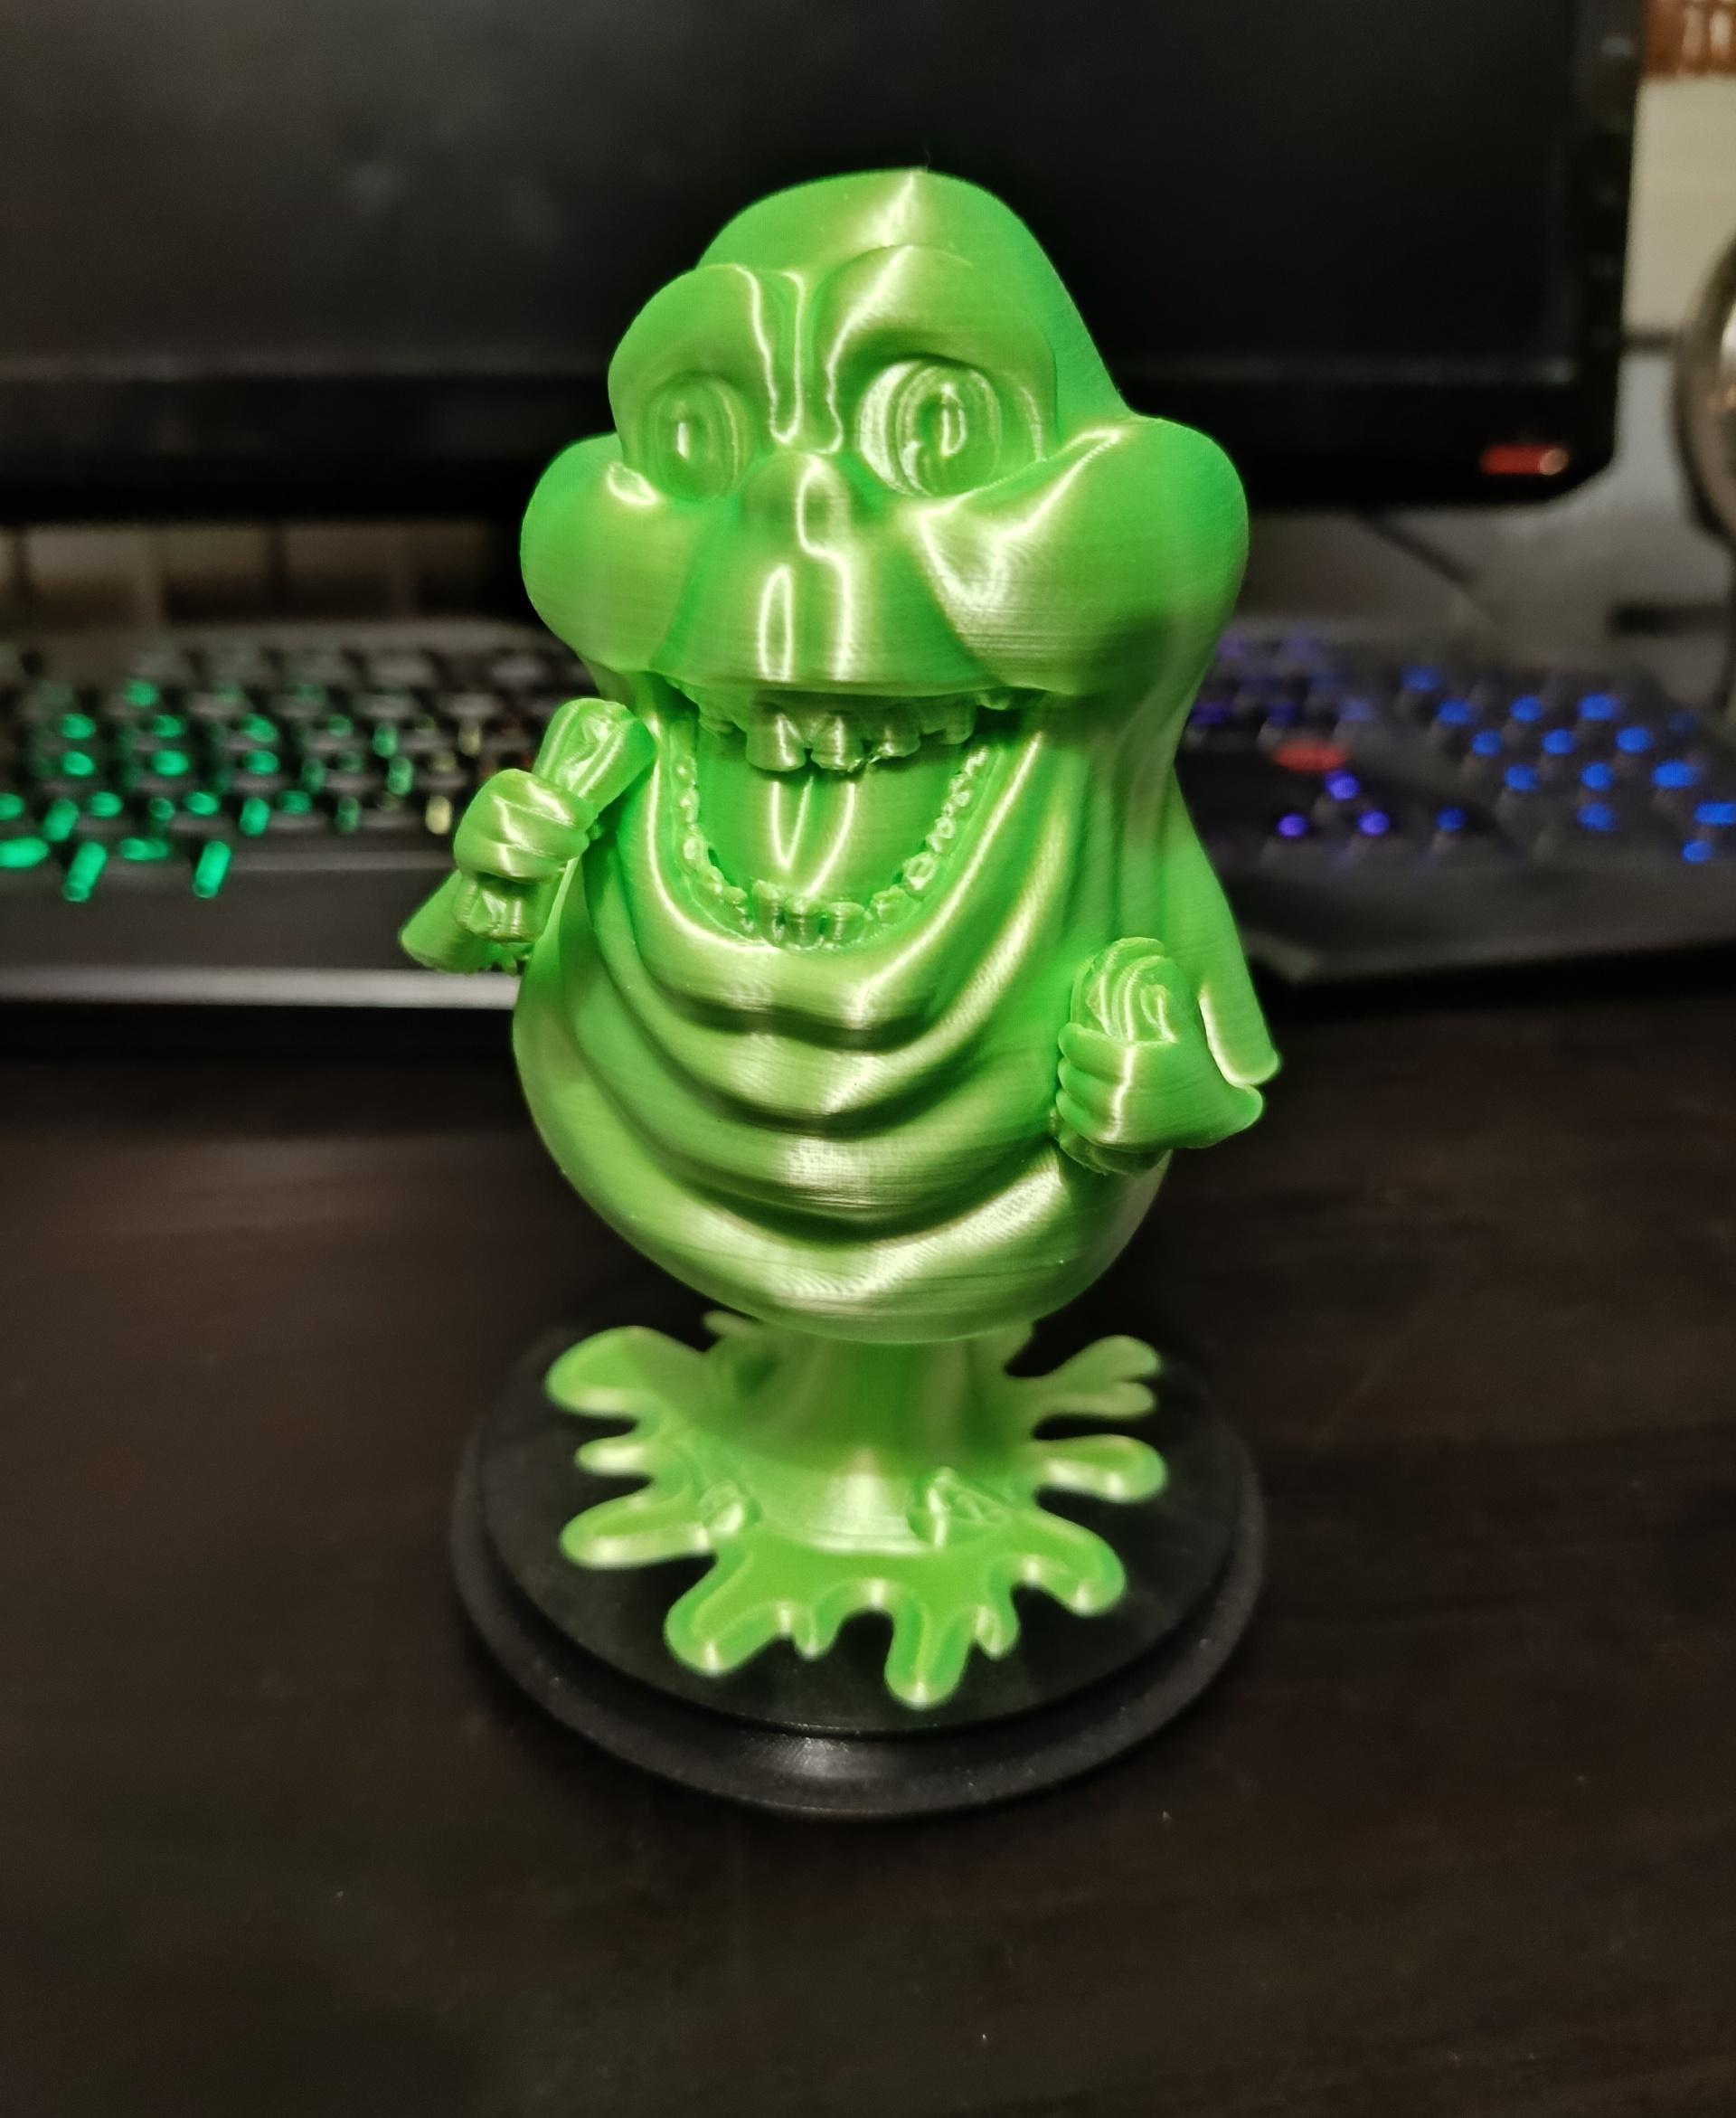 Little Big Head - Little Big Head Slimer from Ghostbusters designed by ChelsCCT (ChelseyCreatesThings) and printed by Frikarte3D using Artillery Fluo Green and Geeetech Black PLA filaments. - 3d model